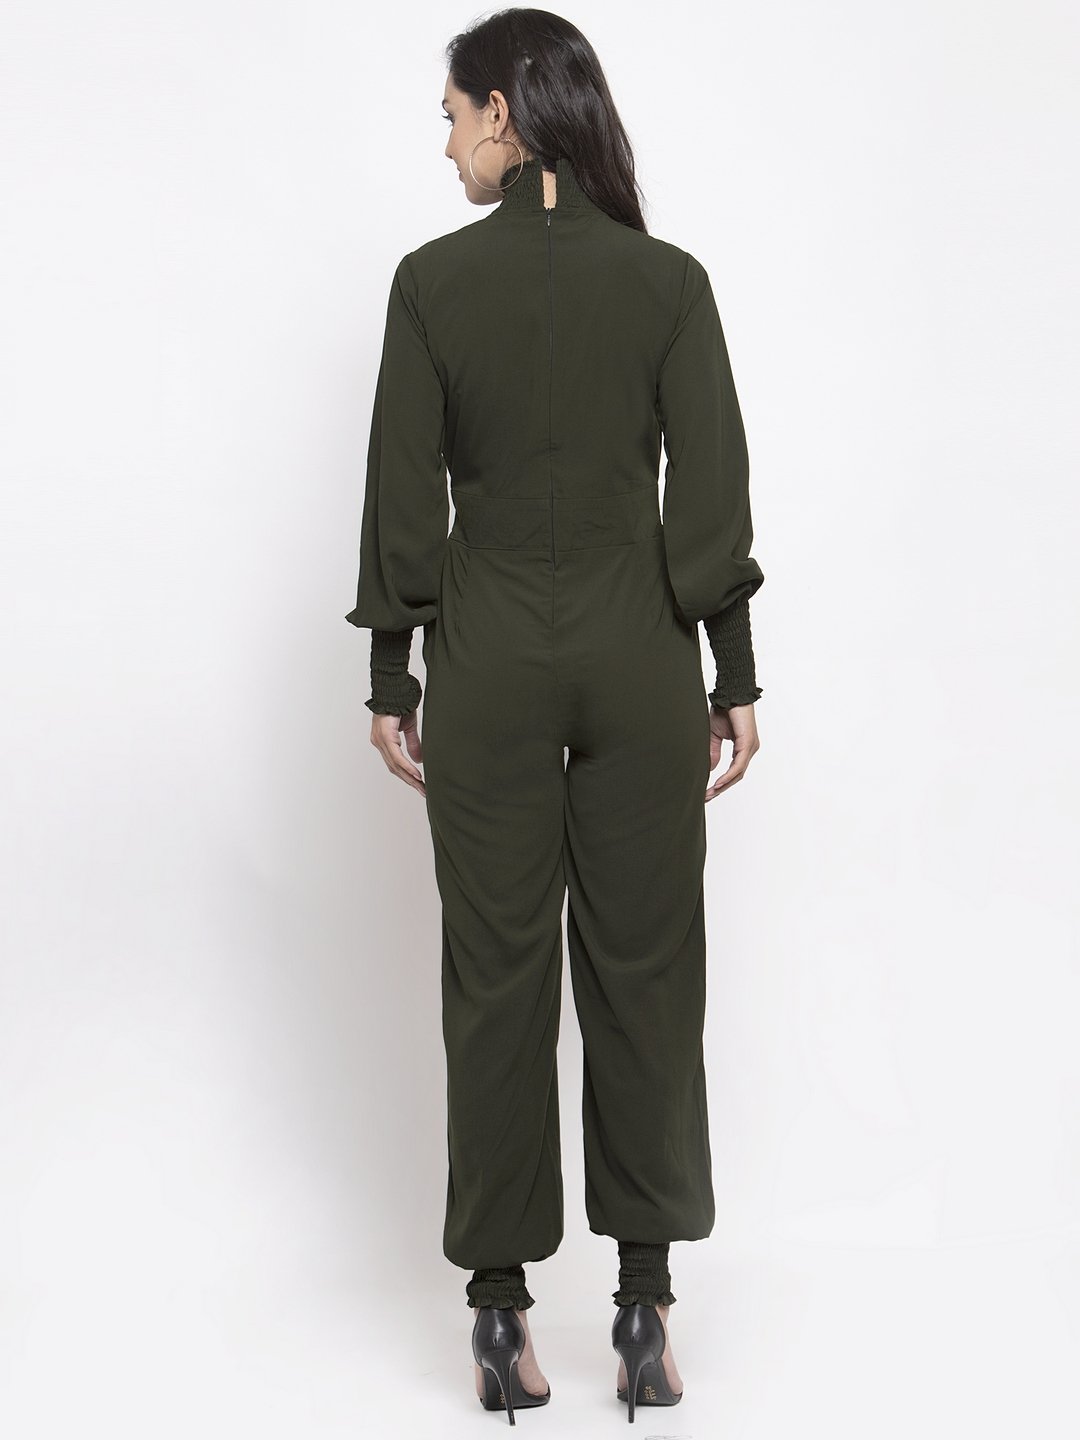 Women's Olive Green Solid Basic Jumpsuit - Jompers